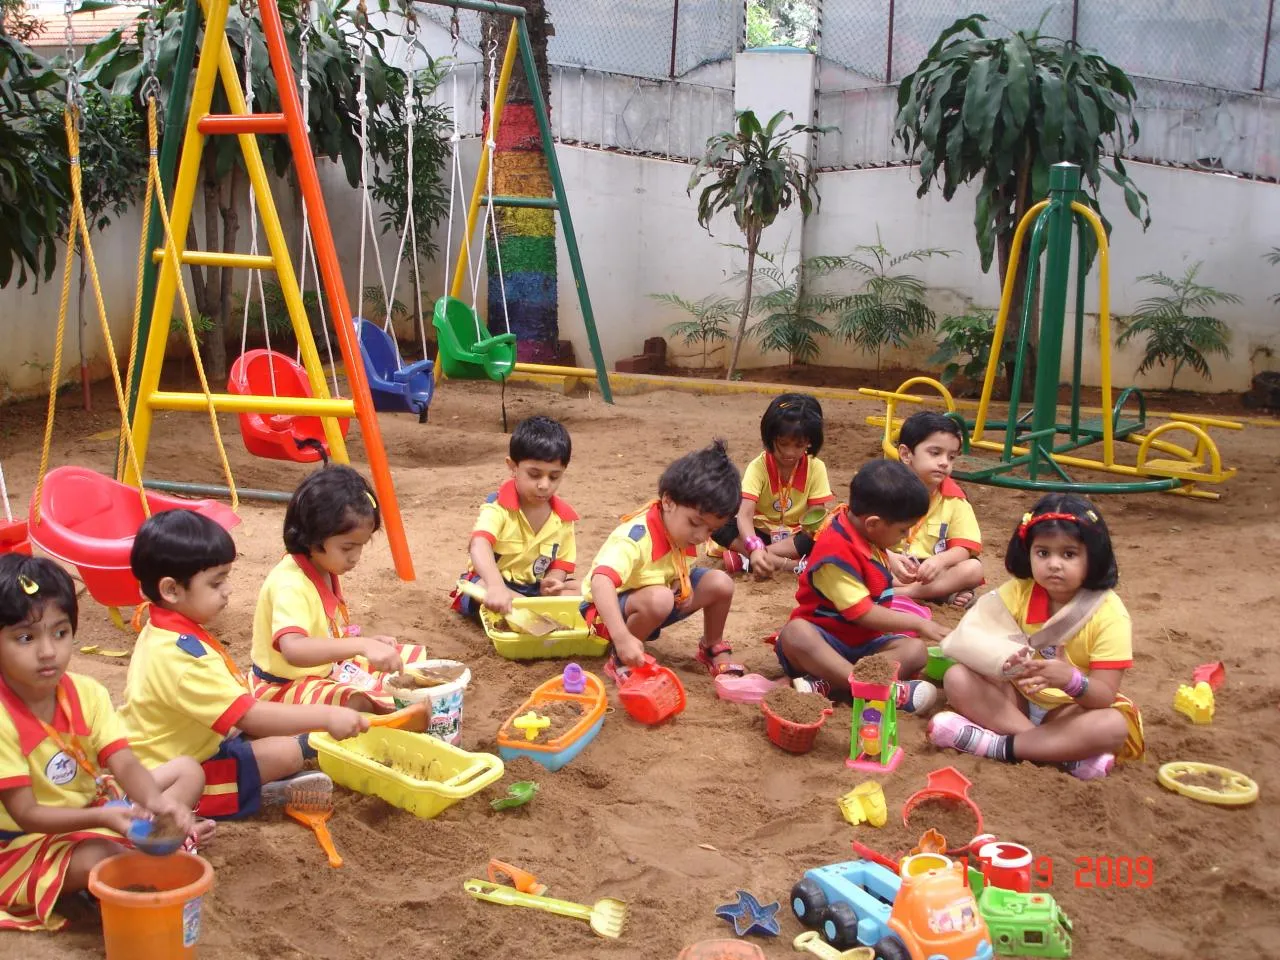 Parents forcing children below 3 years to attend preschool are committing an illegal act: Gujarat HC